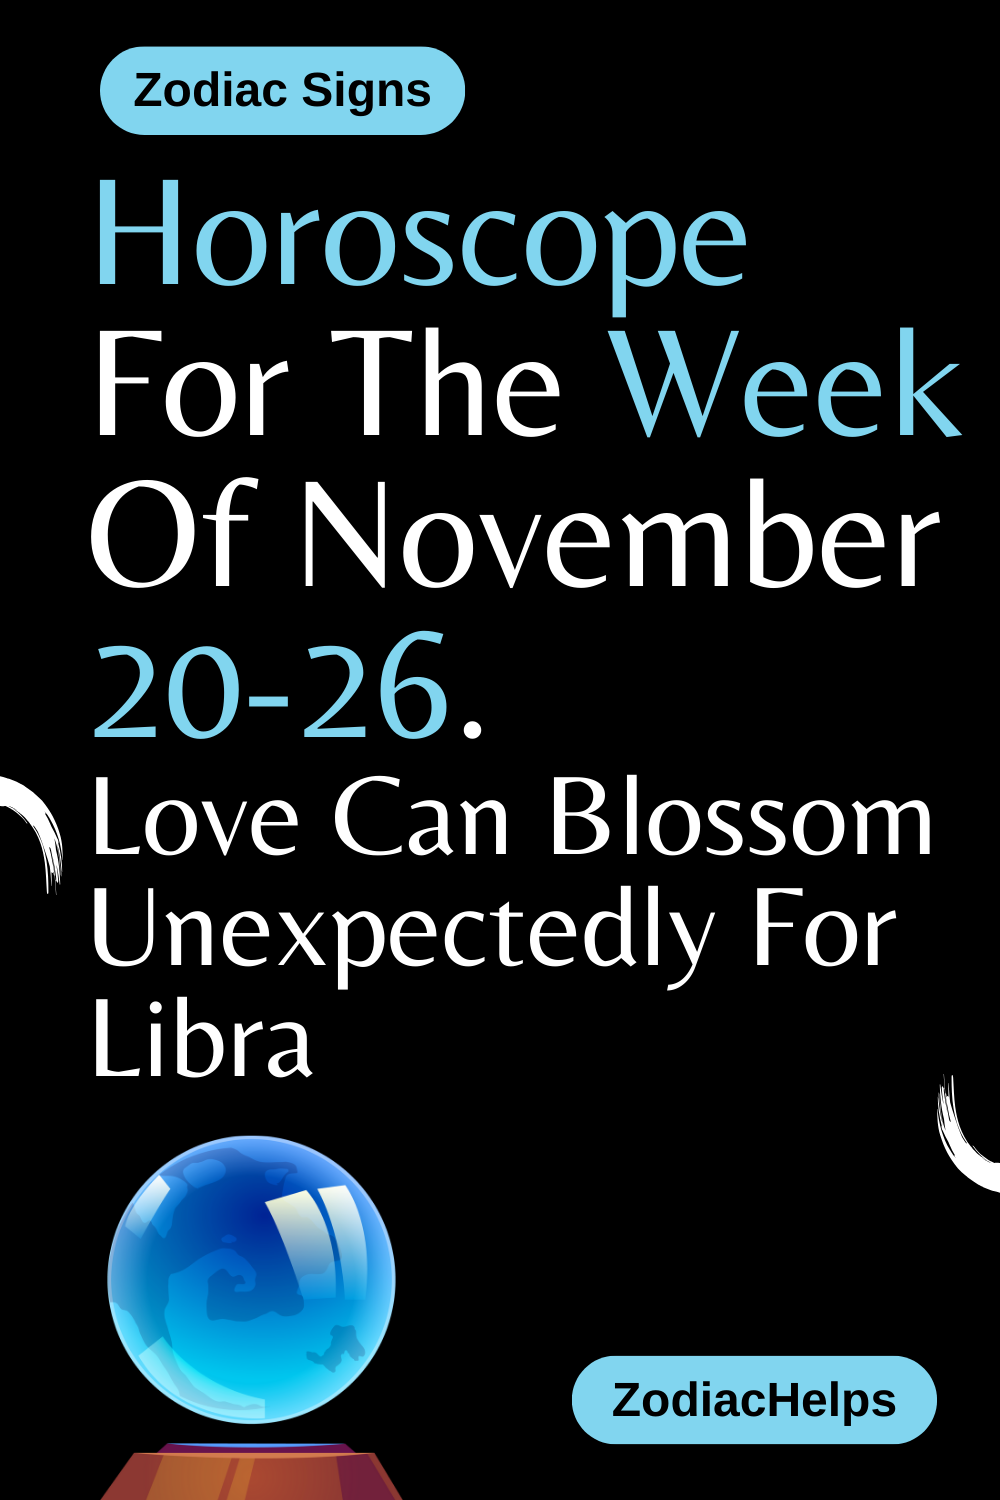 Horoscope For The Week Of November 20-26. Love Can Blossom Unexpectedly For Libra